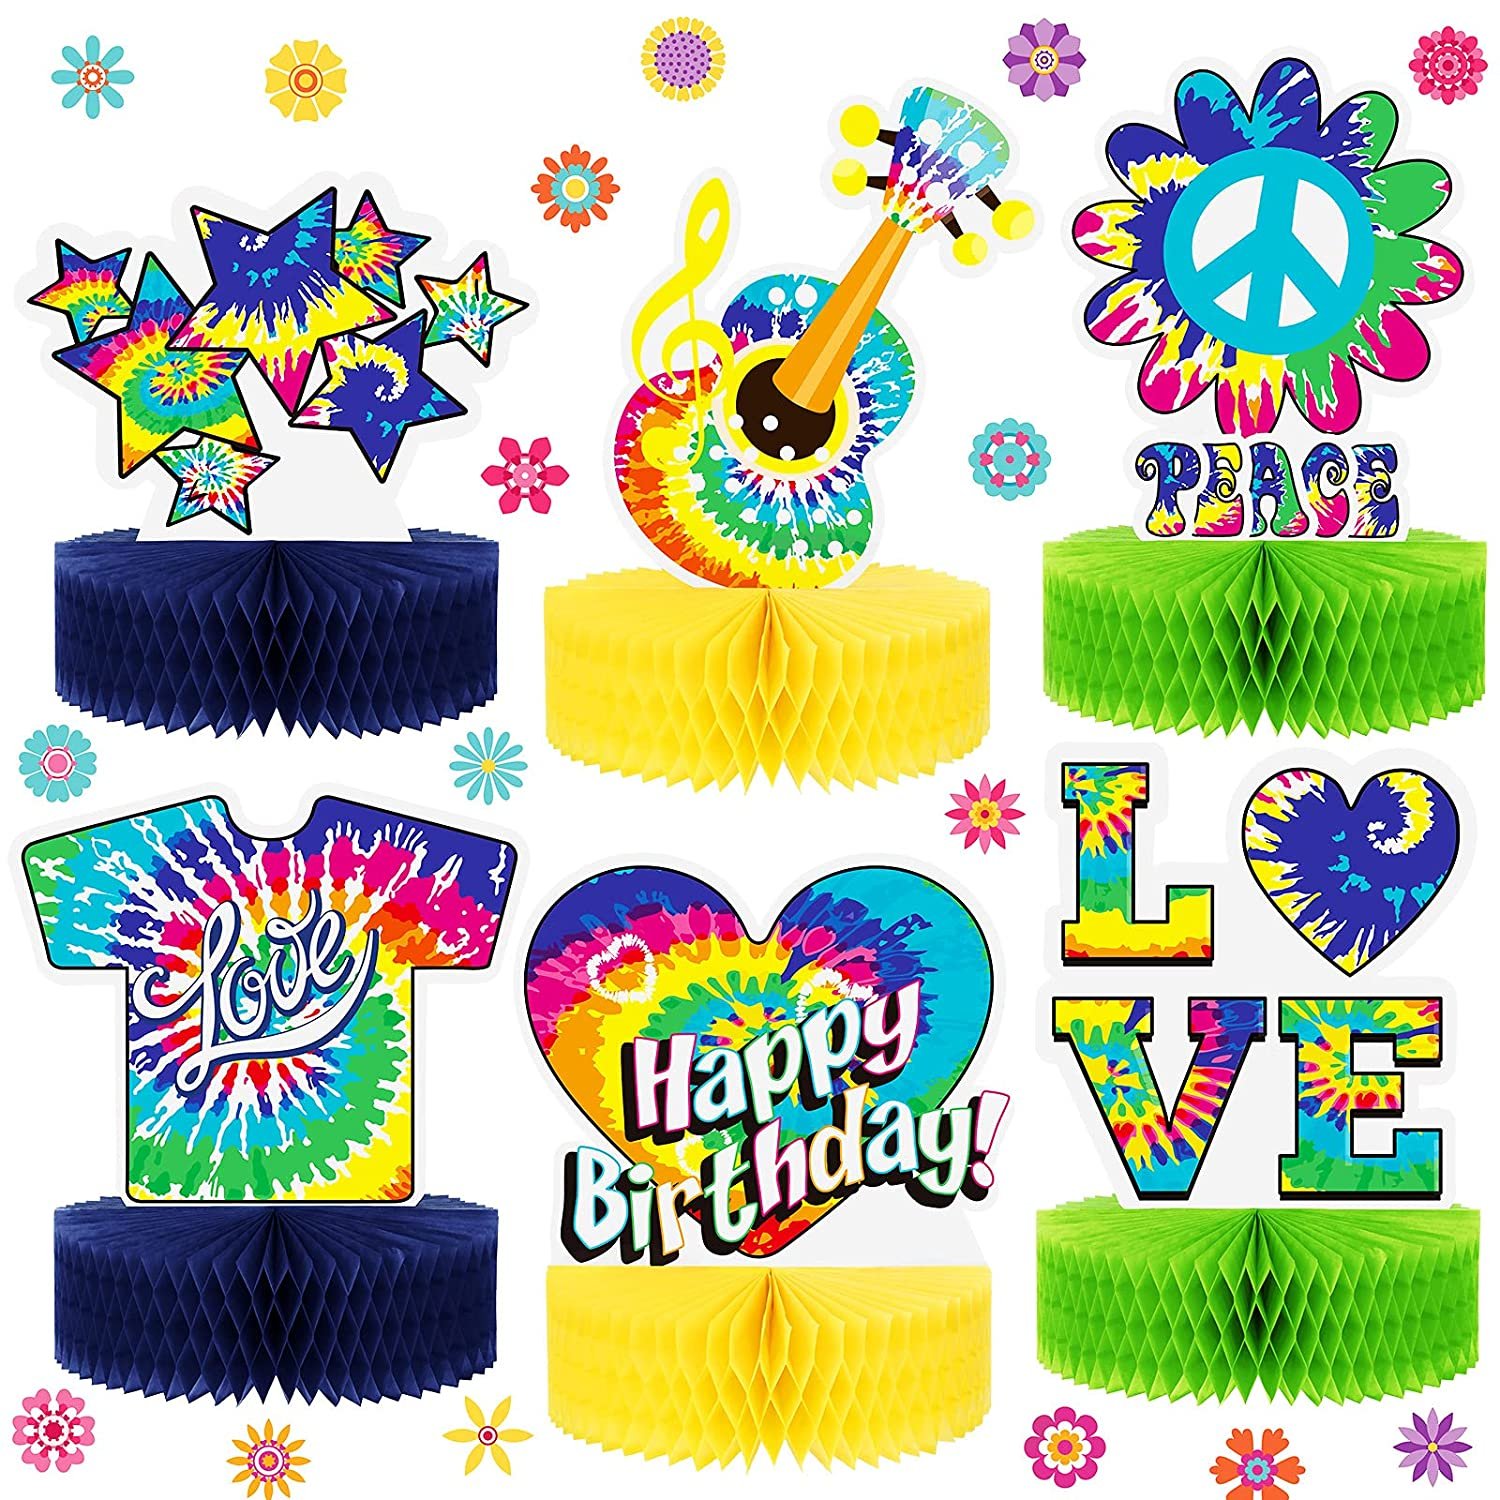 6 Pieces Tie Dye Party Honeycomb Centerpieces Tie Dye Birthday Party Decorations Sunflowe